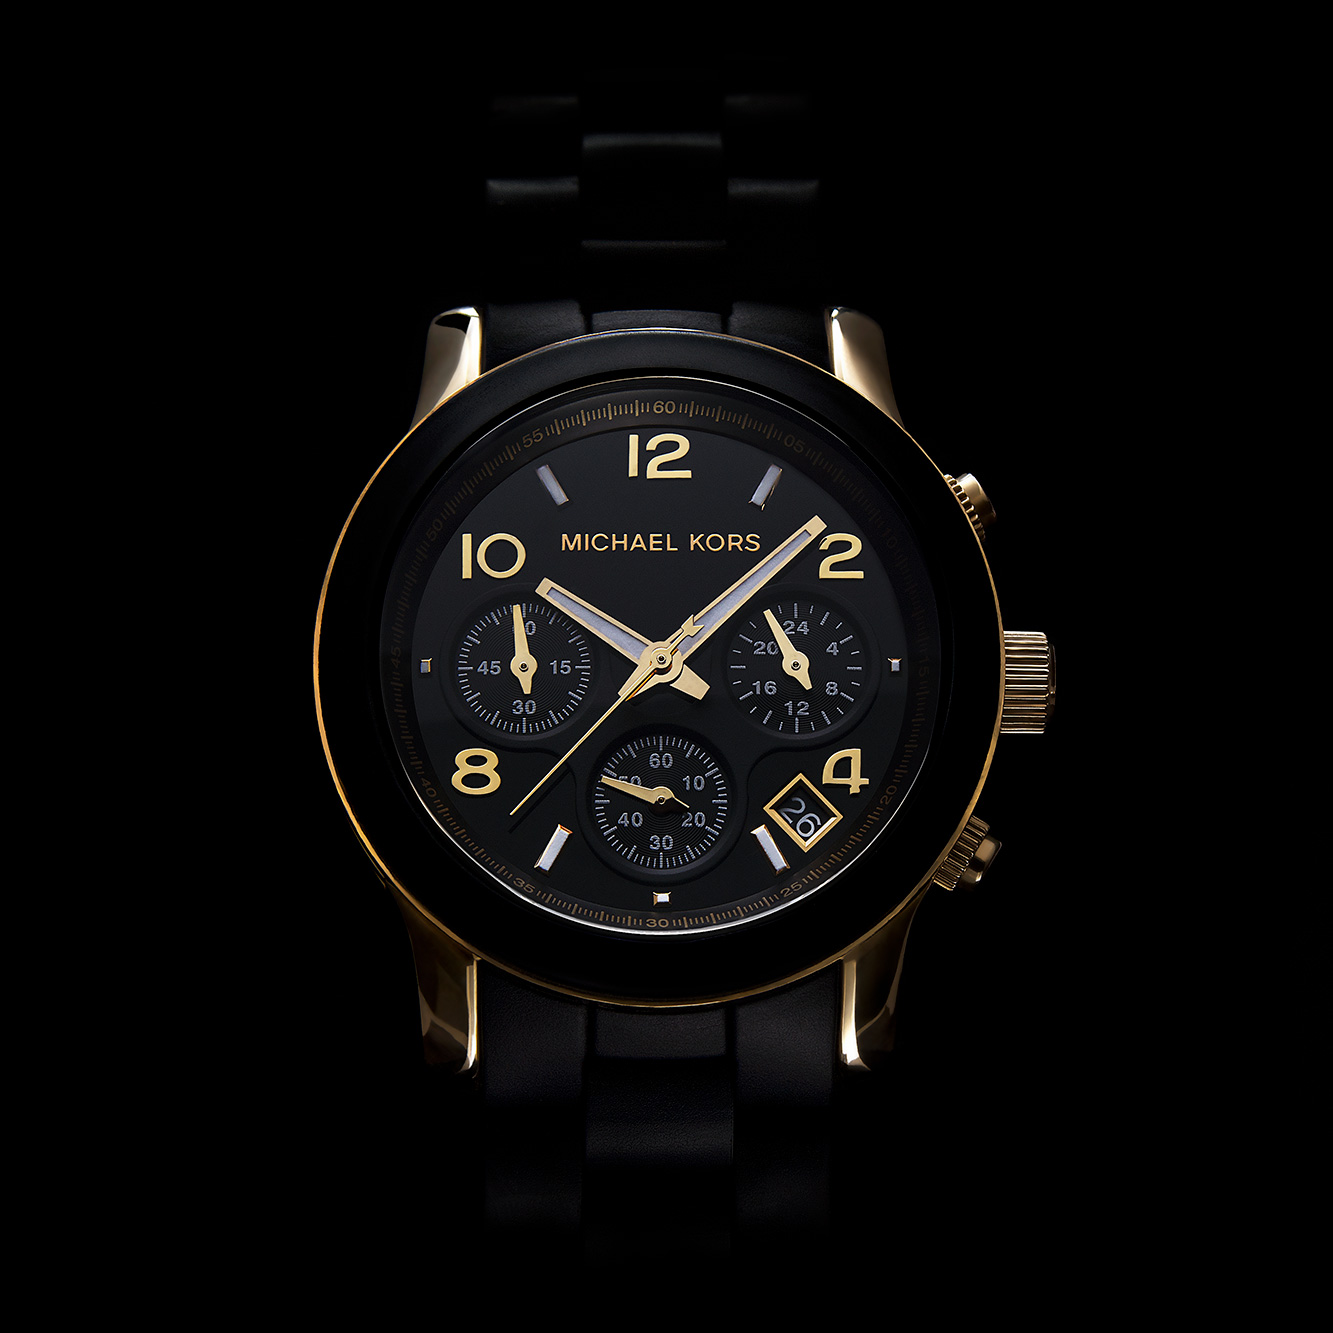 Michael Kors watch product photography